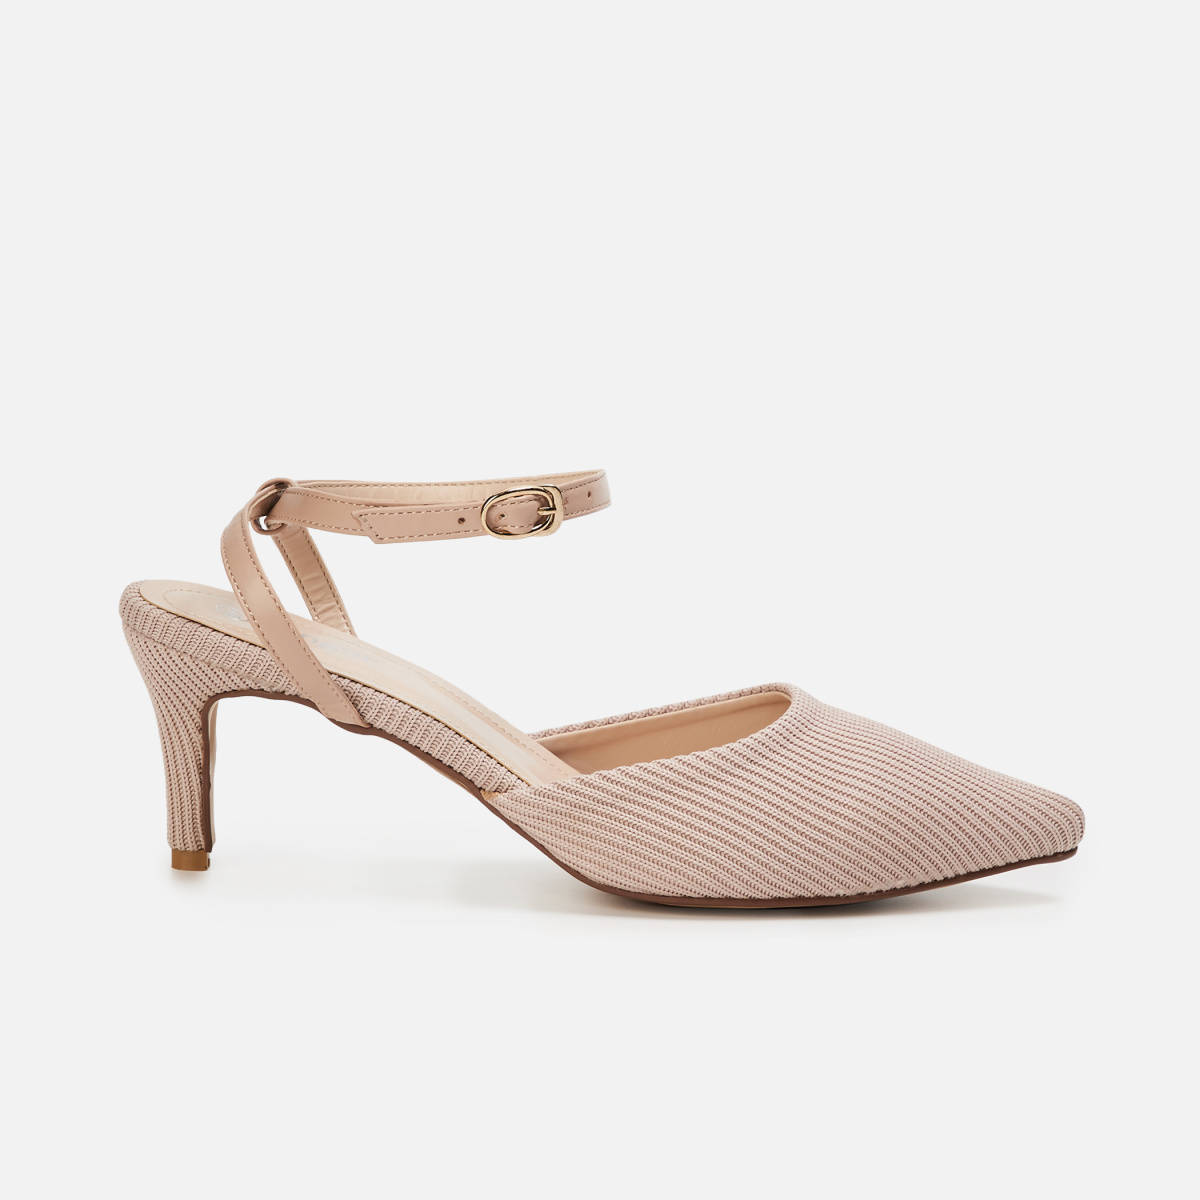 Nude Patent Ankle Strap Heeled Sandals - CHARLES & KEITH IN